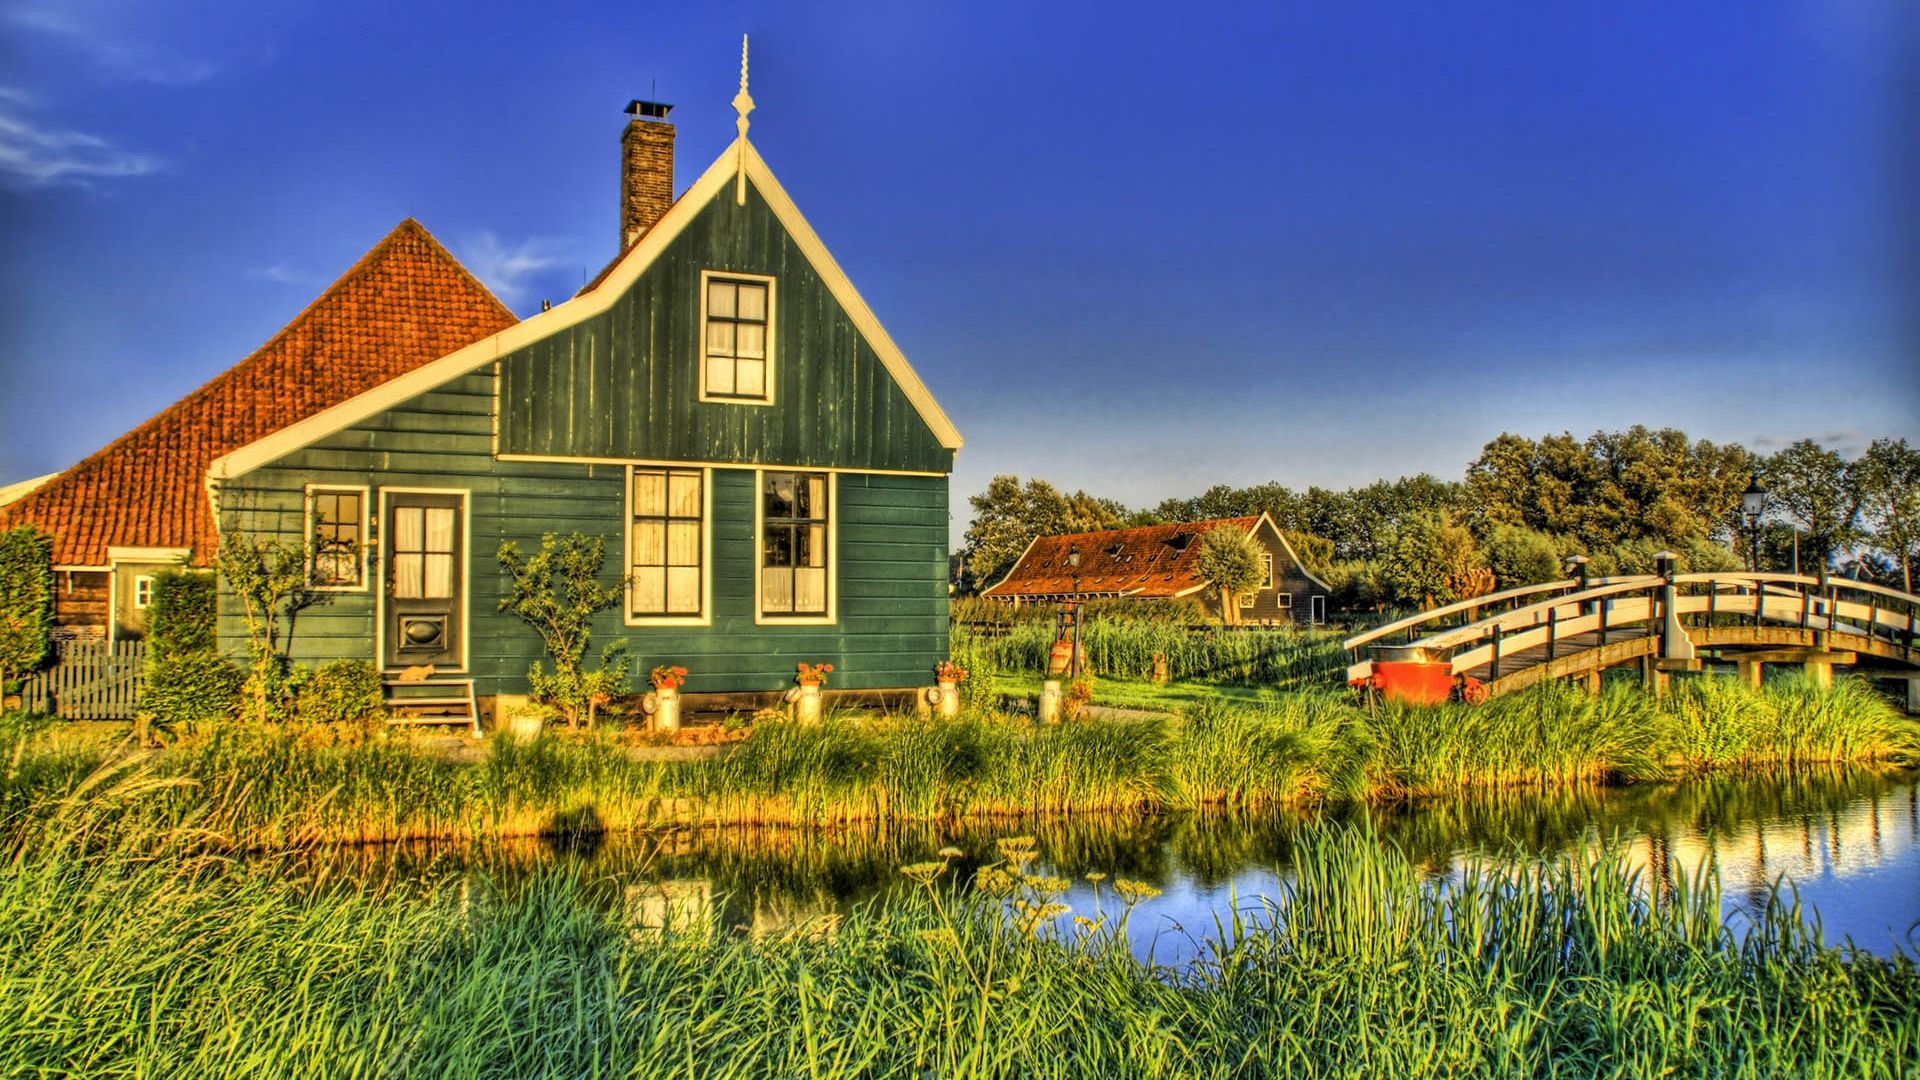 cities, rivers, grass, sky, summer, small house, lodge, village, bridge, hdr